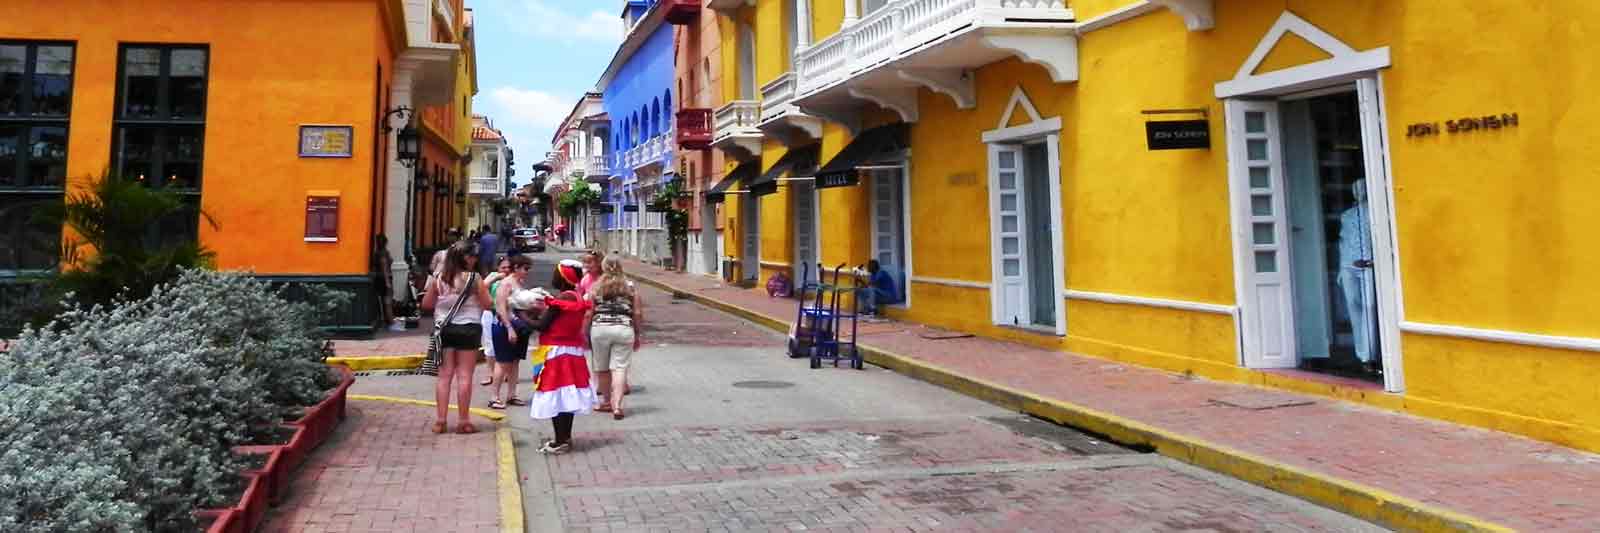 Cruises from florida to cartagena colombia